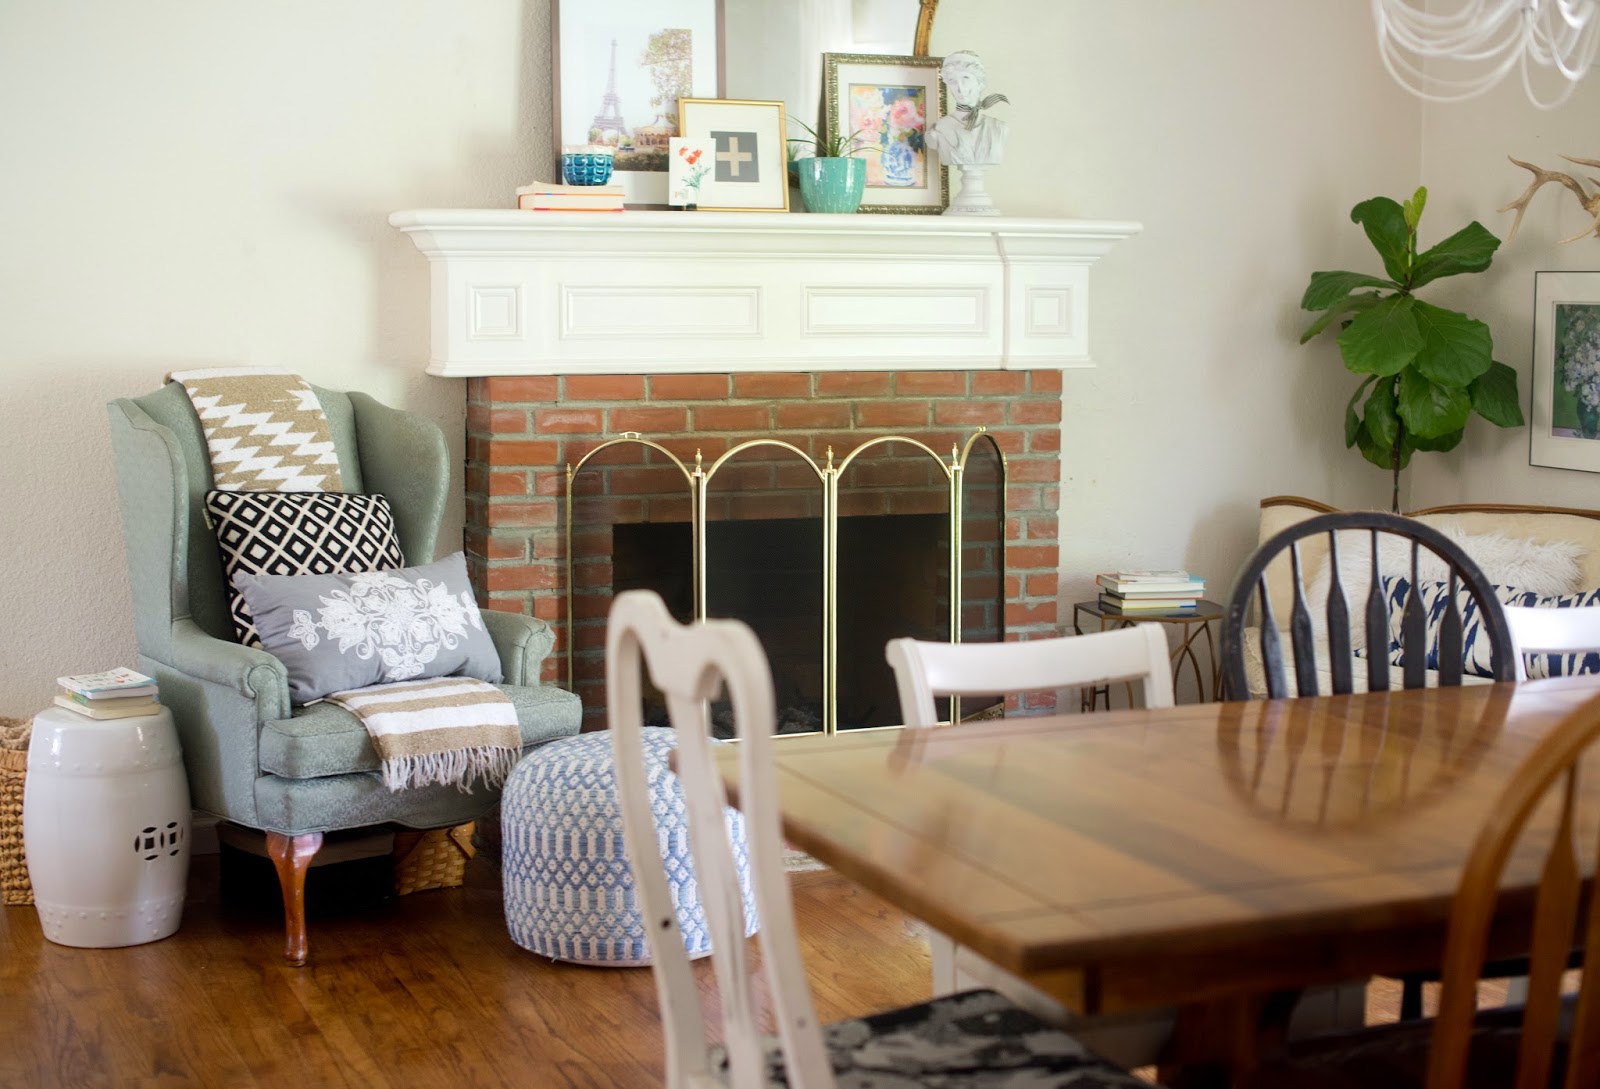 Domestic Fashionista: Updated Fireplace Decor and Loving the Home I Have